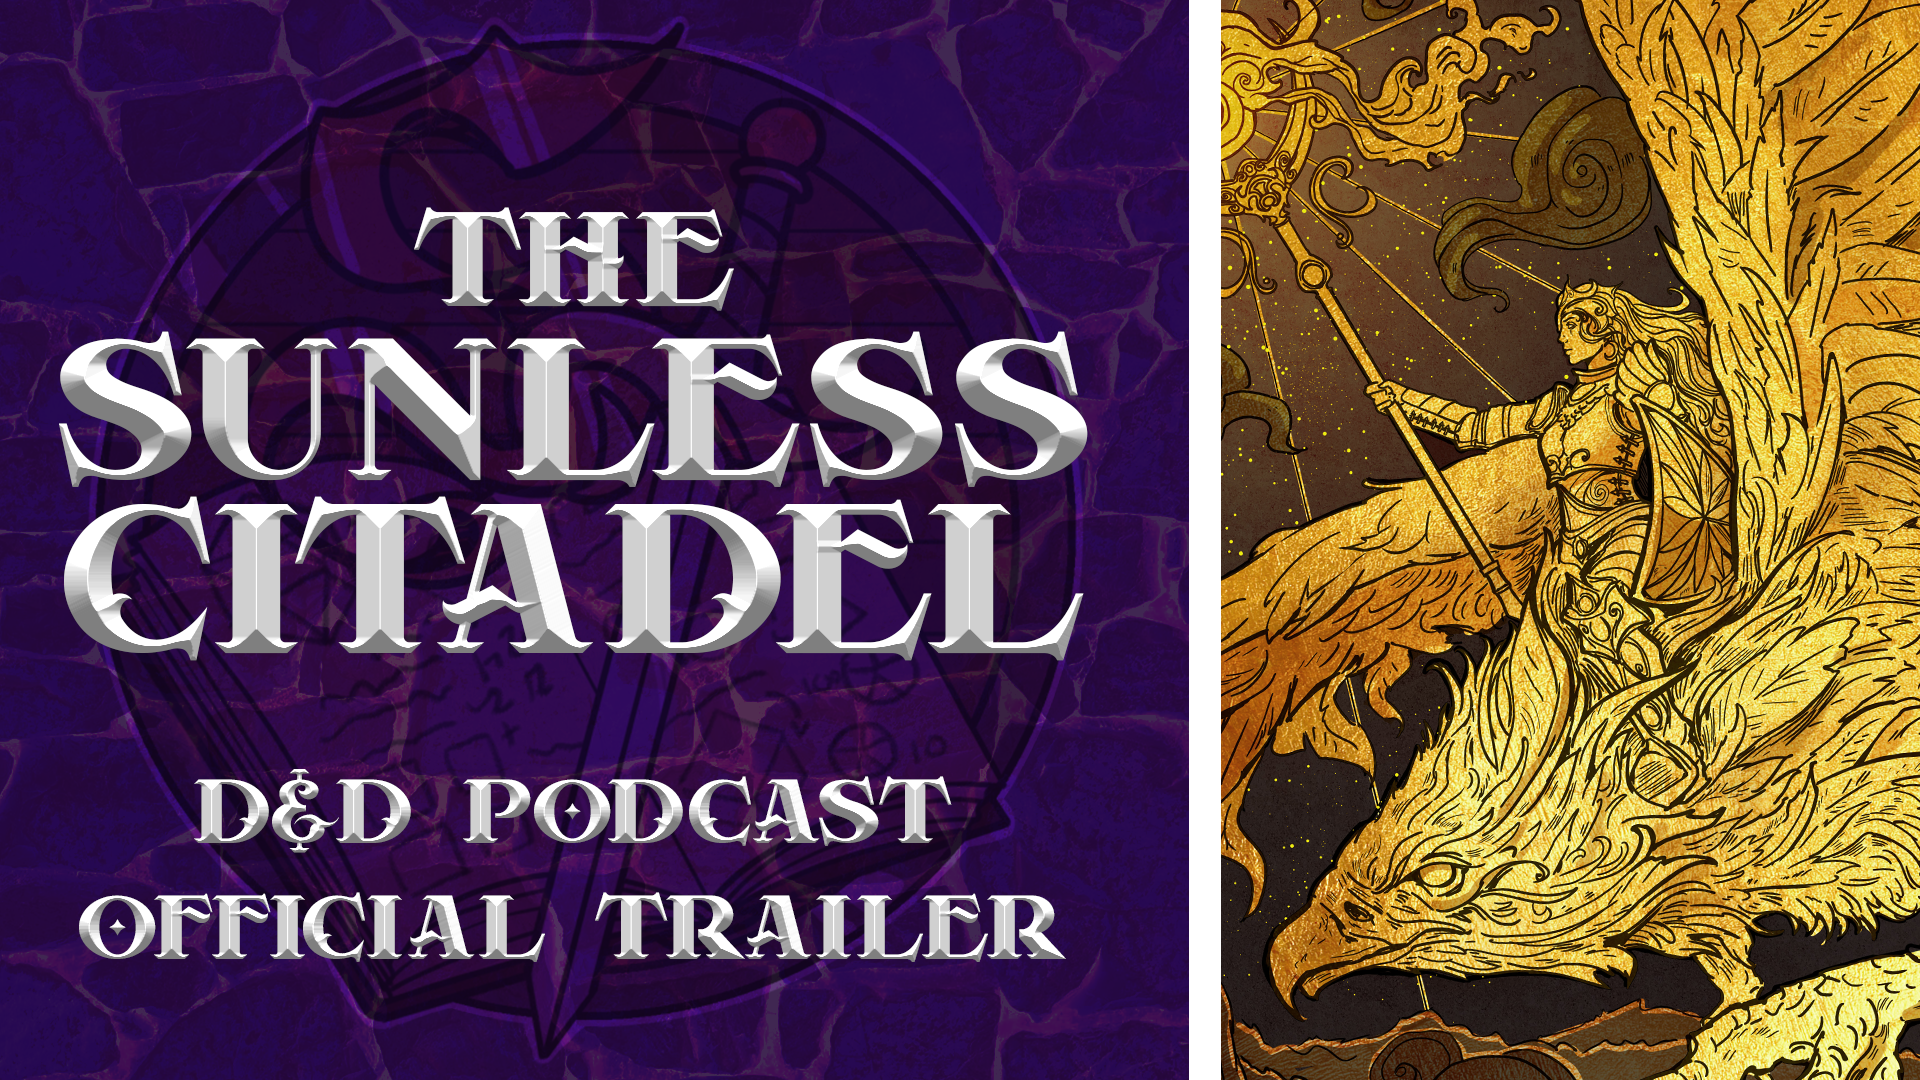 The Sunless Citadel Trailer | D&D Actual Play Podcast Series